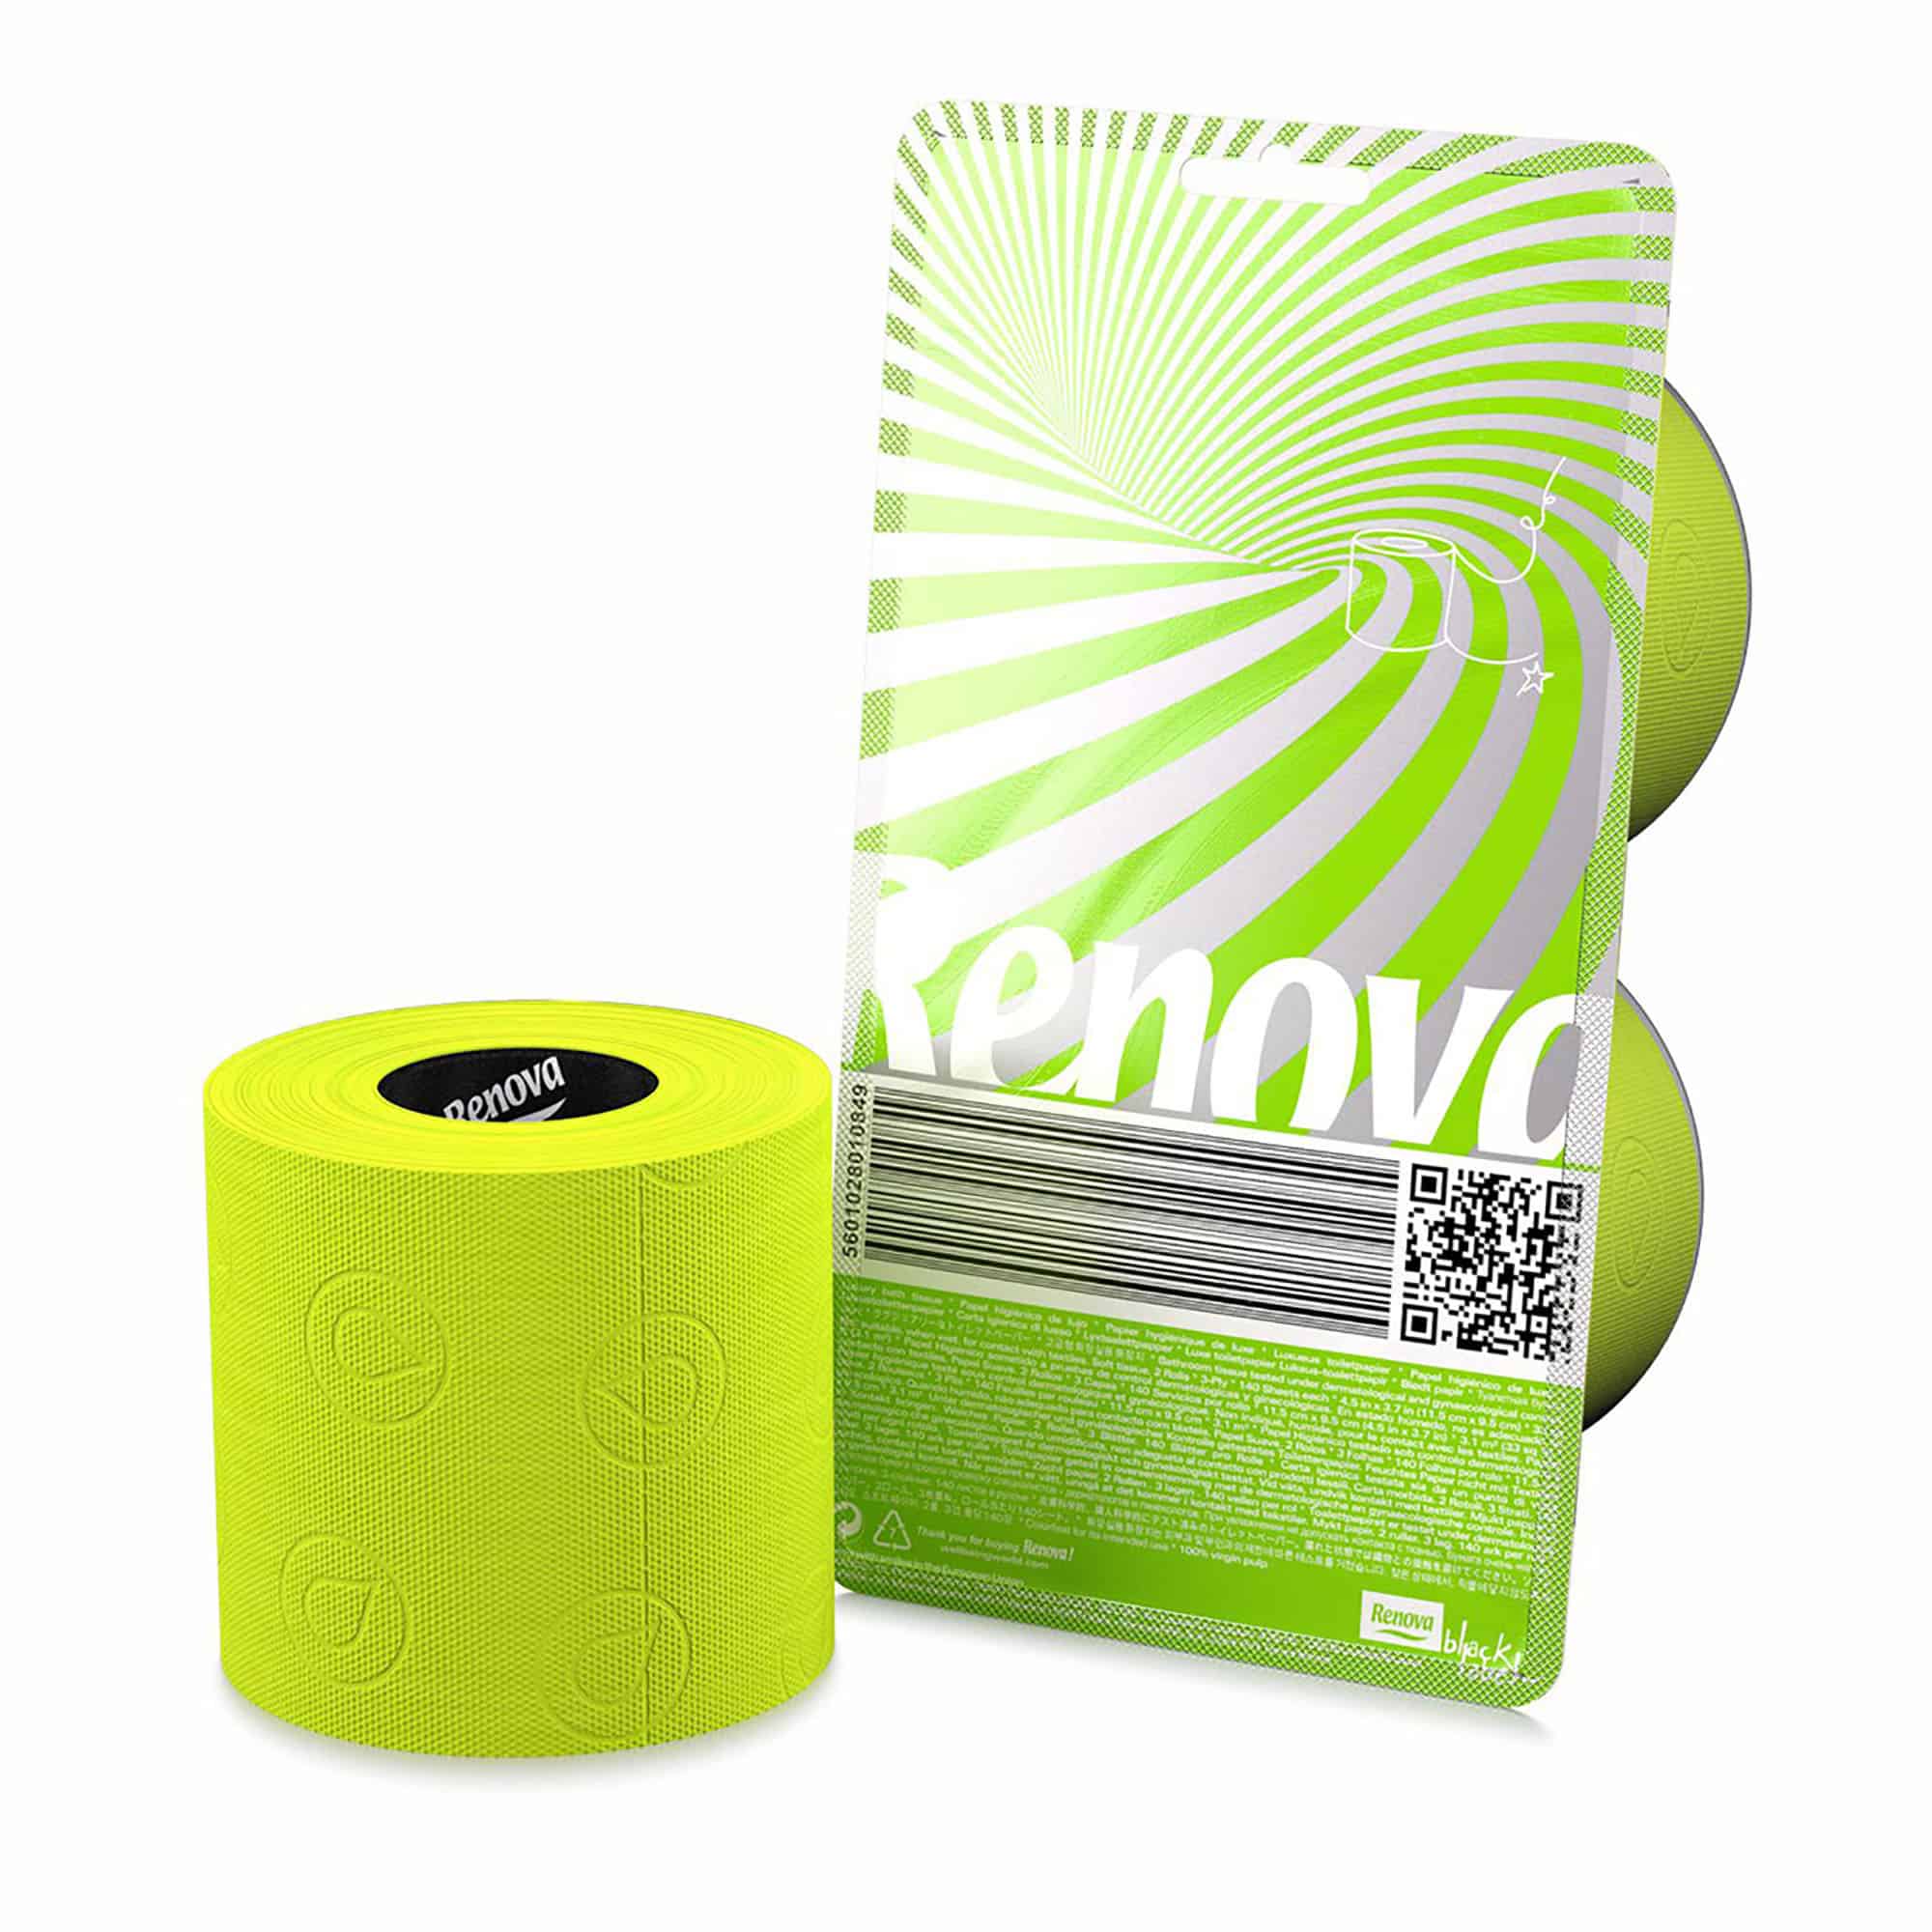 https://roll-lux.com/wp-content/uploads/2020/01/RC200064202-Lime-Green-Toilet-Paper-3-ply-Gift-box-2-Rolls-140-Premium-Quality-sheets-1-Main.jpg